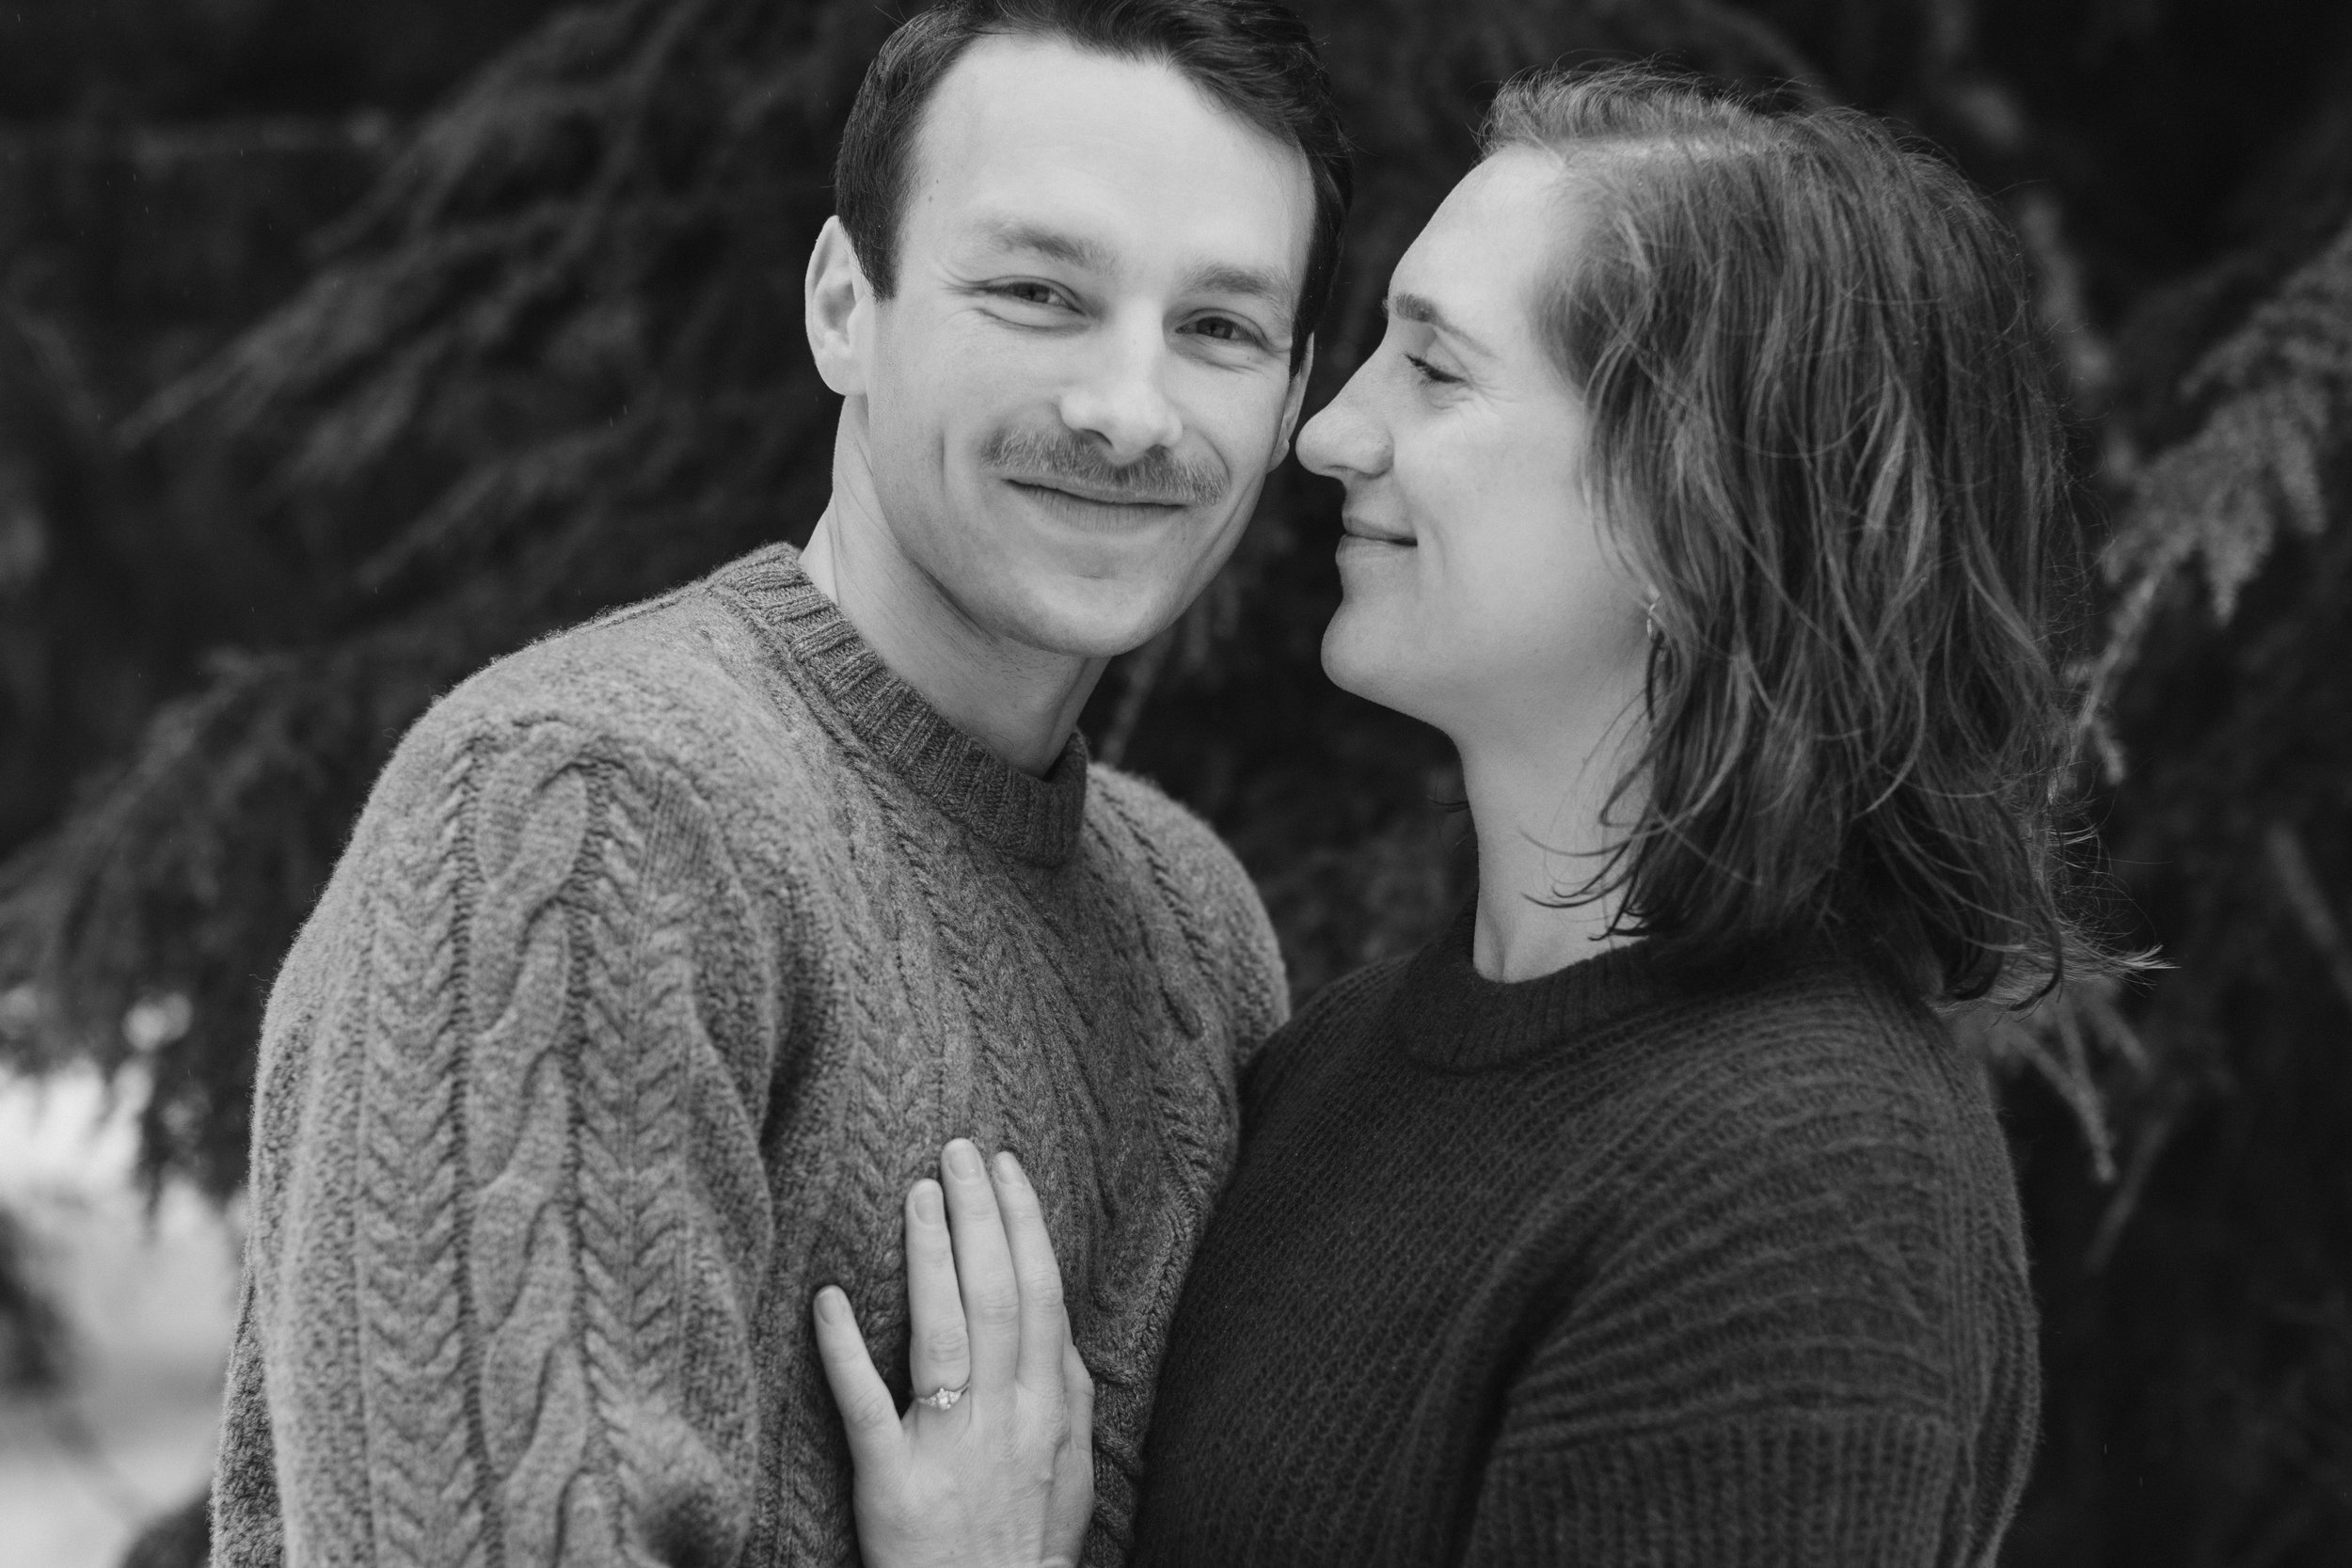 boys looks ahead while girl looks at him, both are wearing sweaters during winter engagement shoot